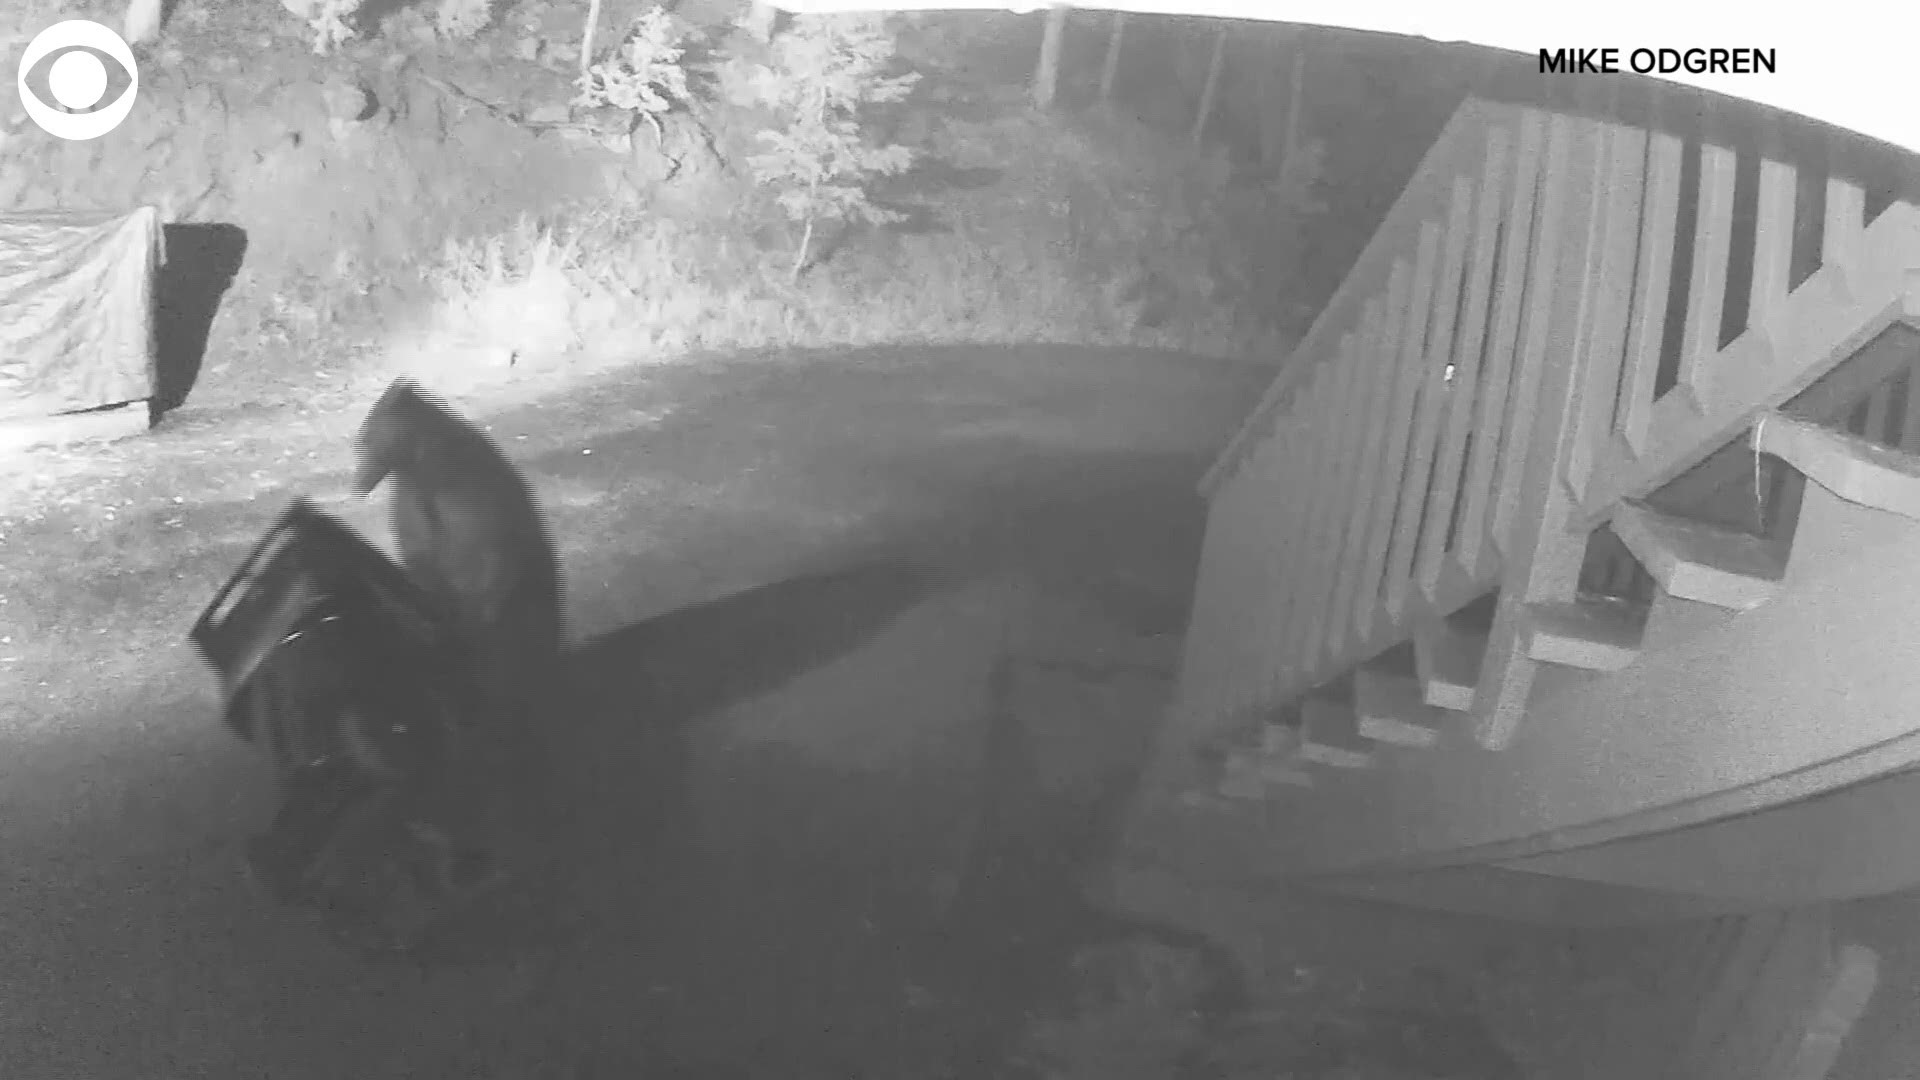 After finding his trash can knocked over, Mike Odgren in Colorado checked his security footage and was surprised to see who the culprit was.  A bear had attempted to dig into his trash, but the owner has locks on the bins to try to stop bears and other animals from getting into the garbage.